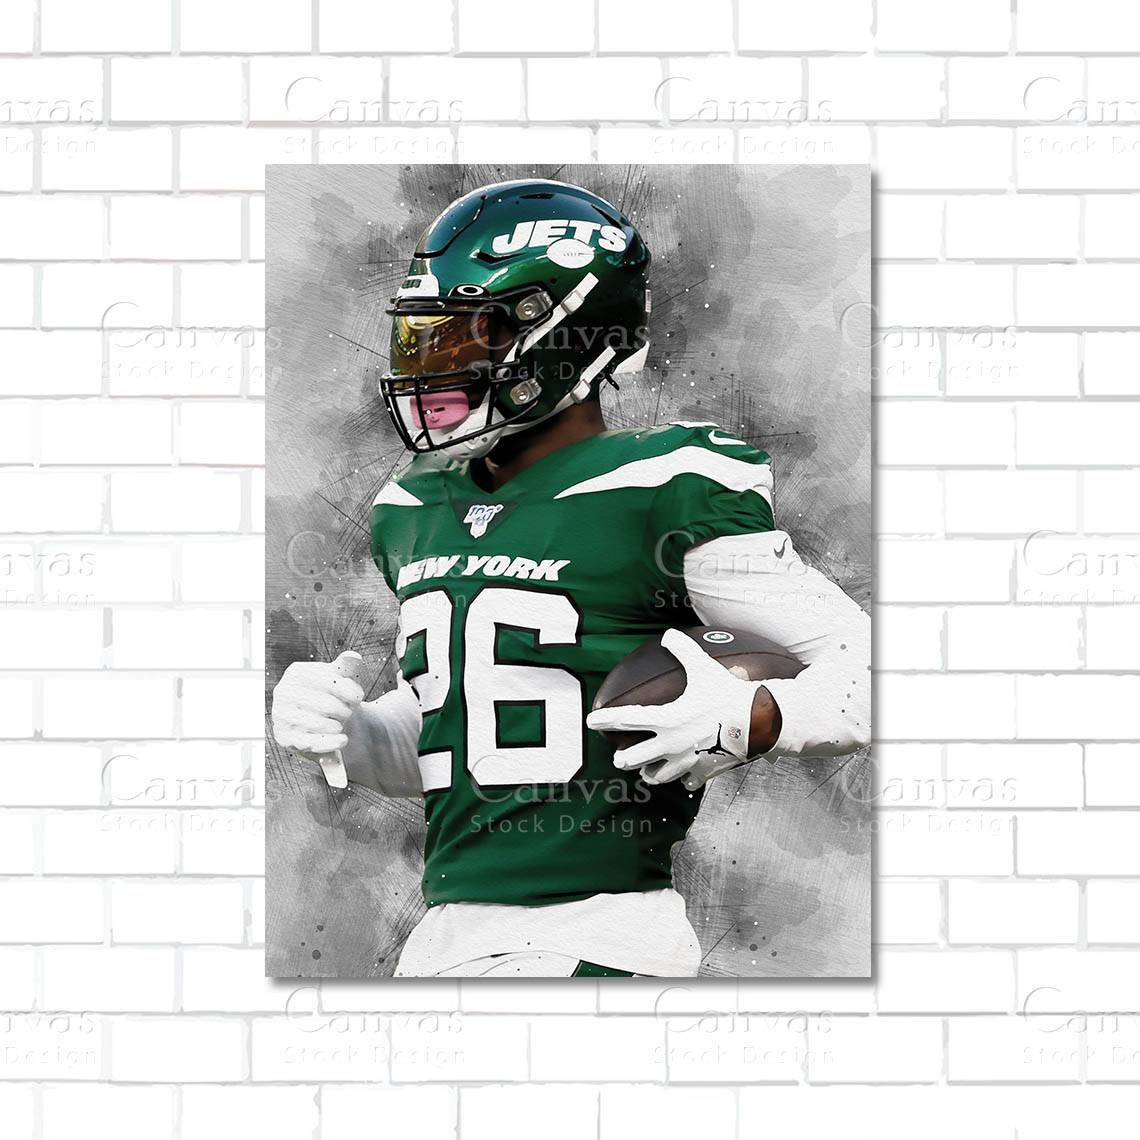 Fan designs for the Jets' new uniforms